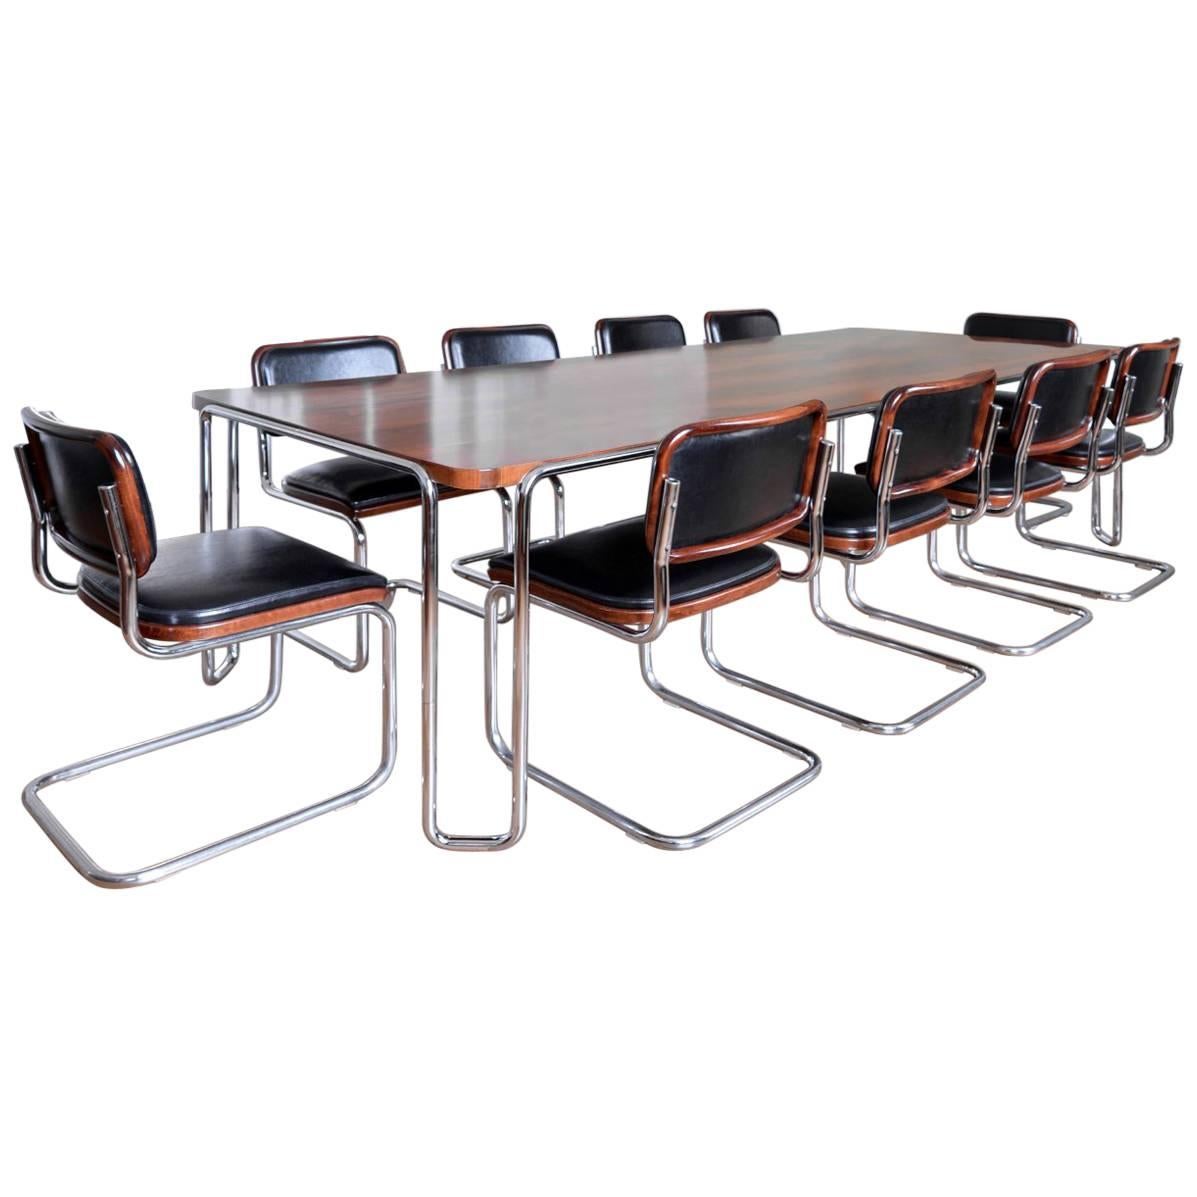 GMD Berlin Conference Tables